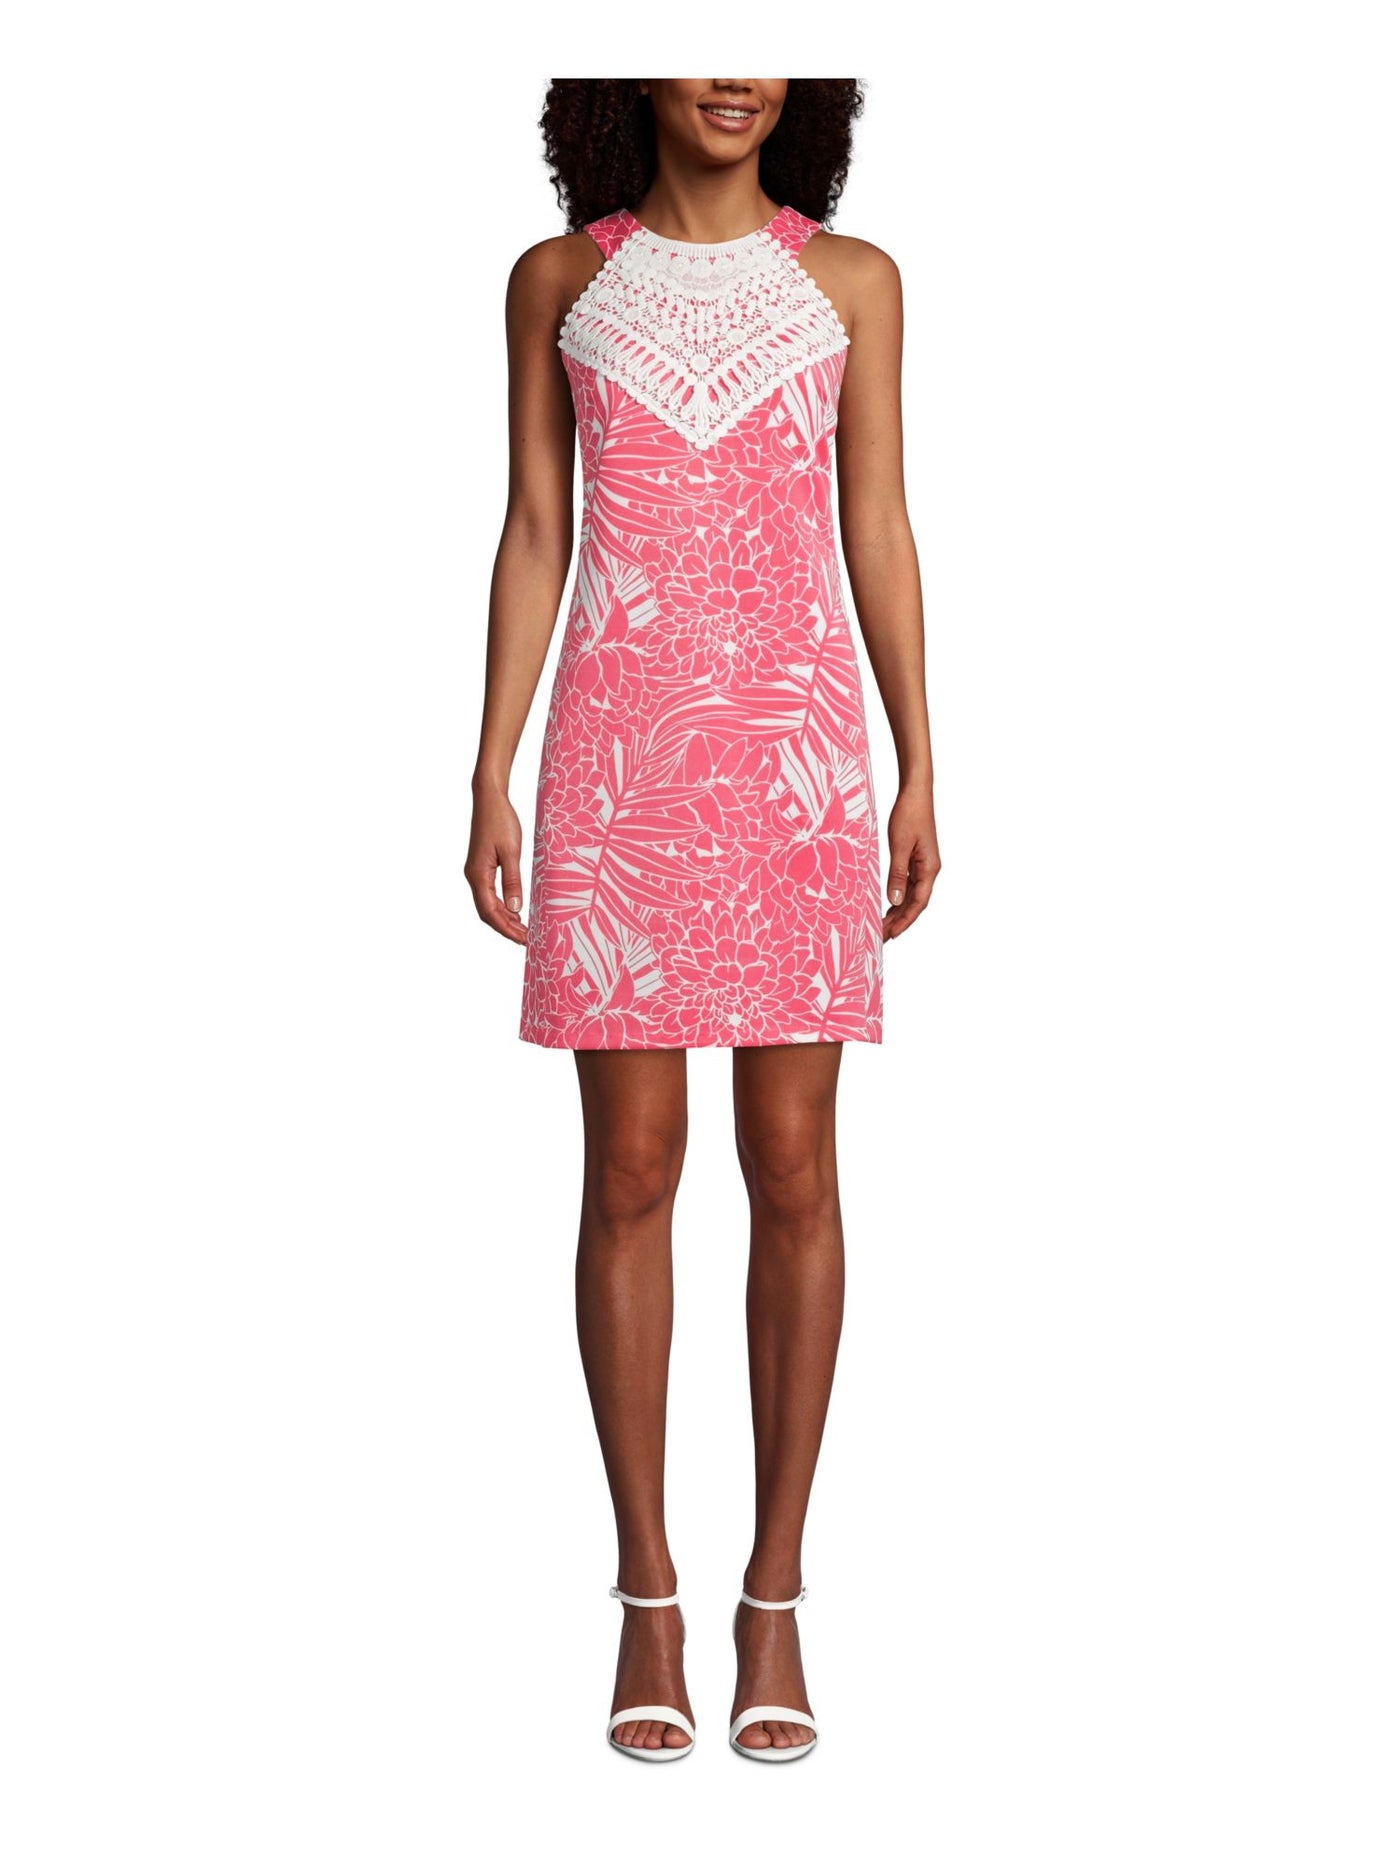 CAPPAGALLO Womens Embroidered Sleeveless Jewel Neck Above The Knee Cocktail Fit + Flare Dress